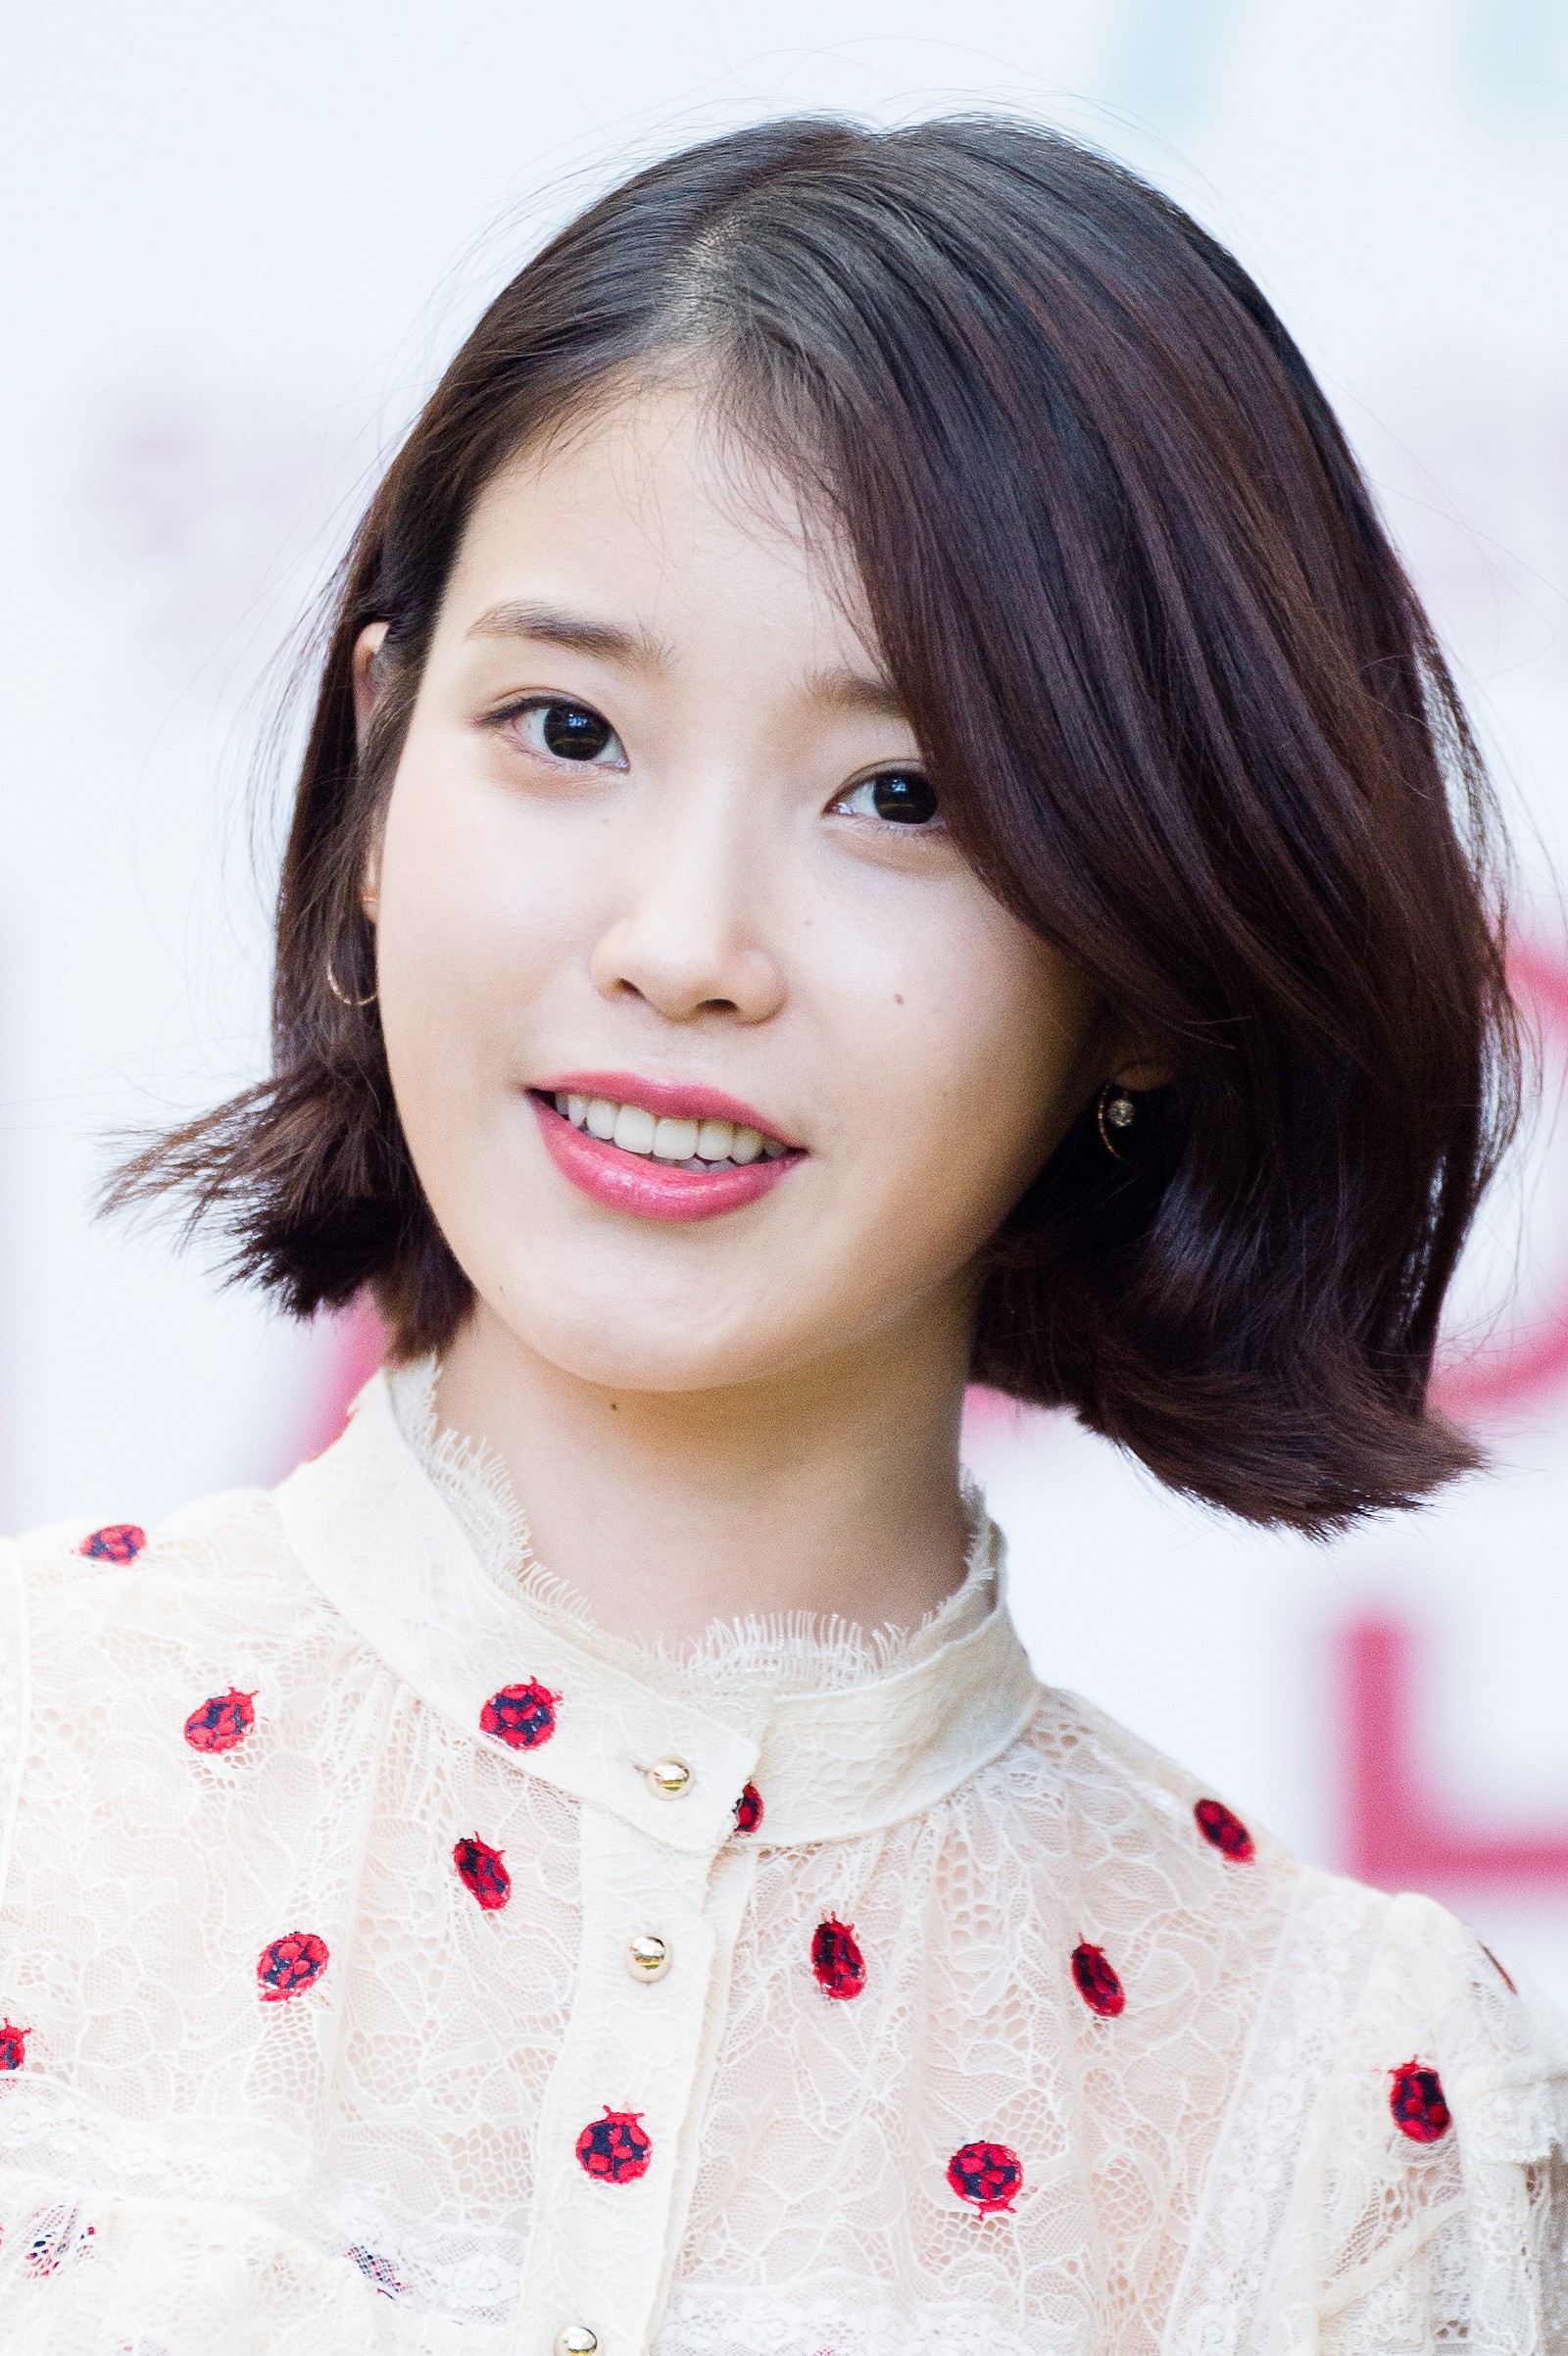  Singer  IU  donation to celebrate the release of 5th album 